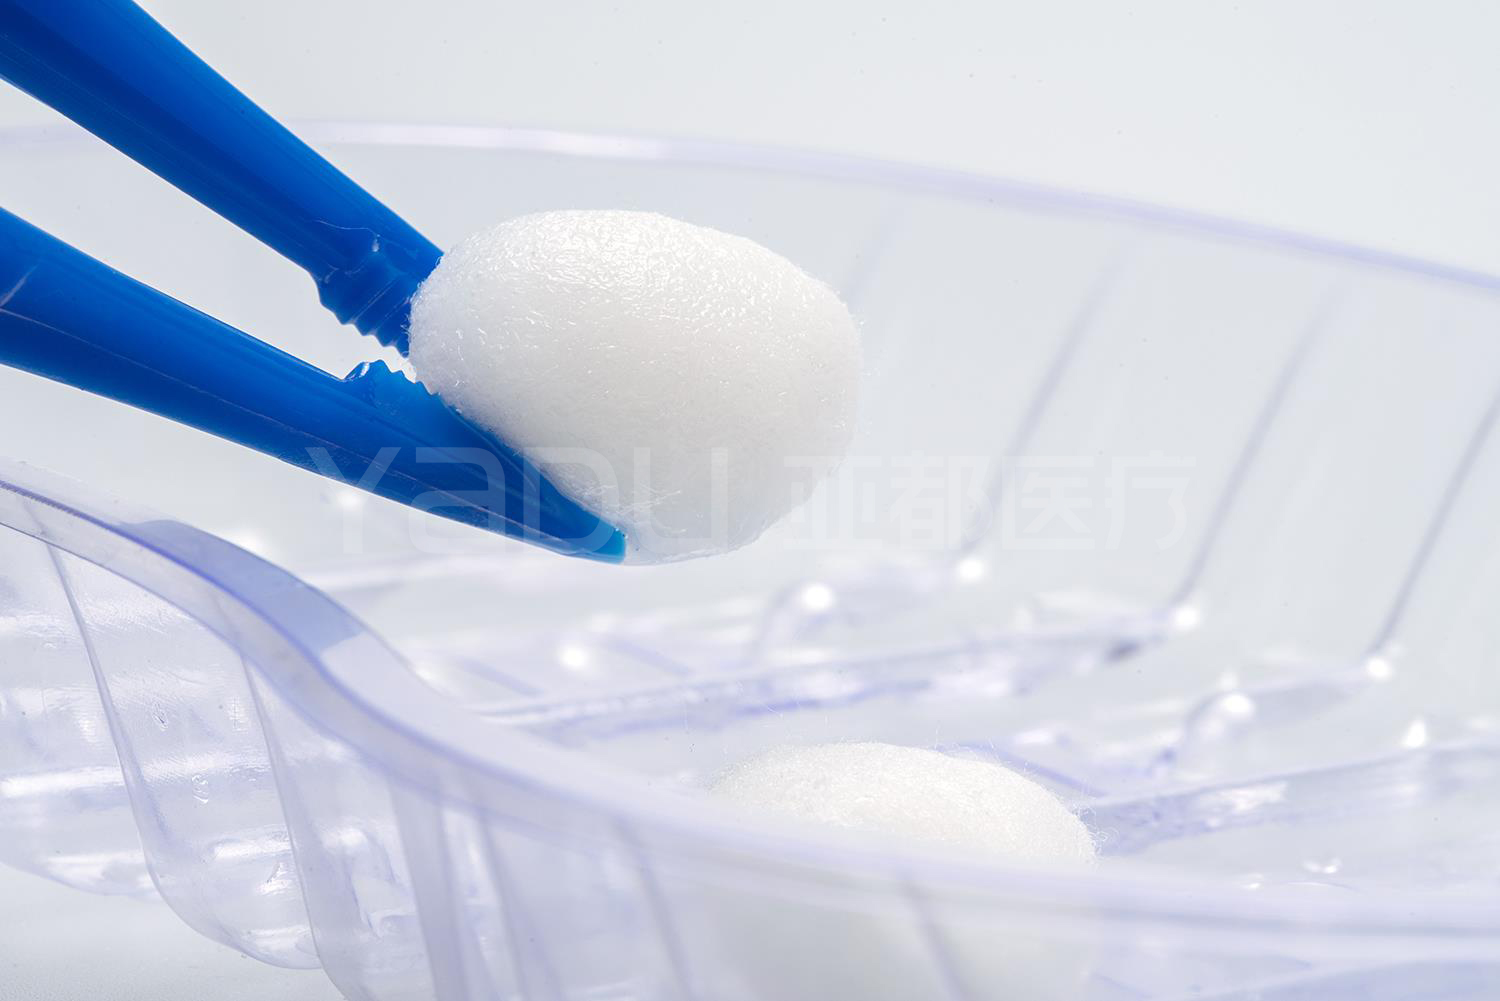 What’s the difference between betadine cotton balls and alcohol cotton balls? Which disinfects better?